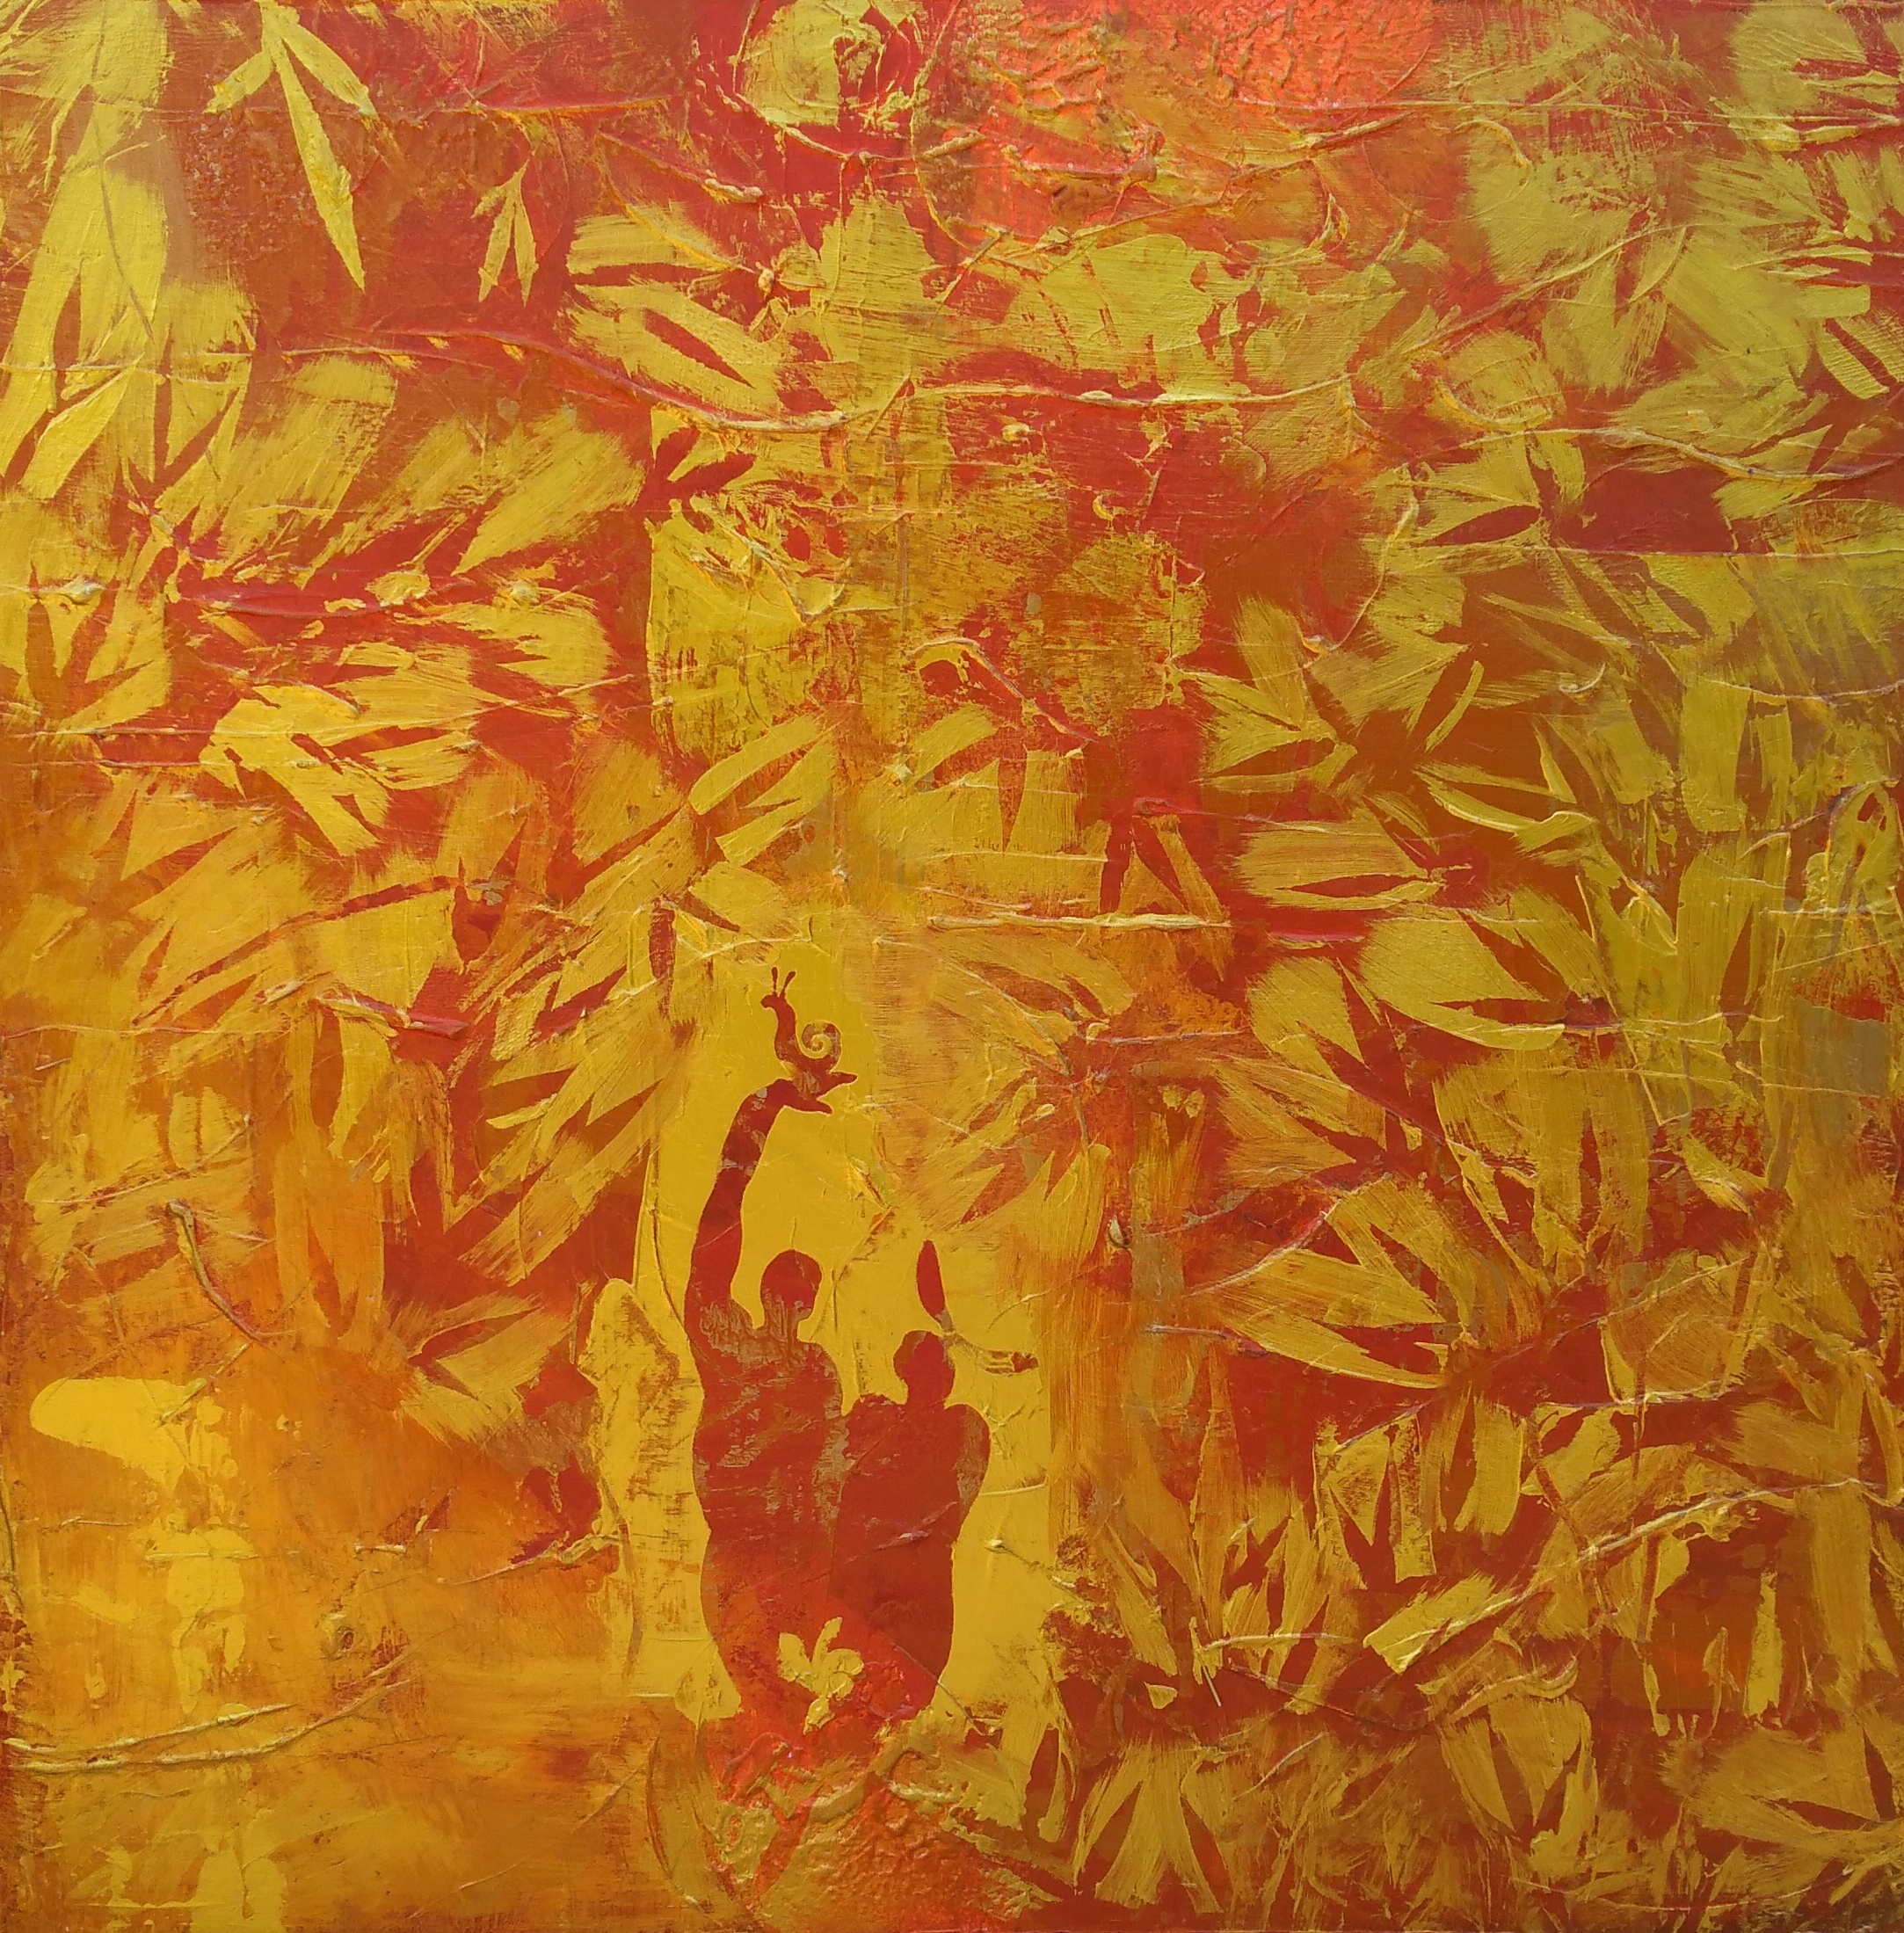 « The bamboo forest – La bambouseraie » - Acrylic – 36 x 36 (91 x 91 cm) 